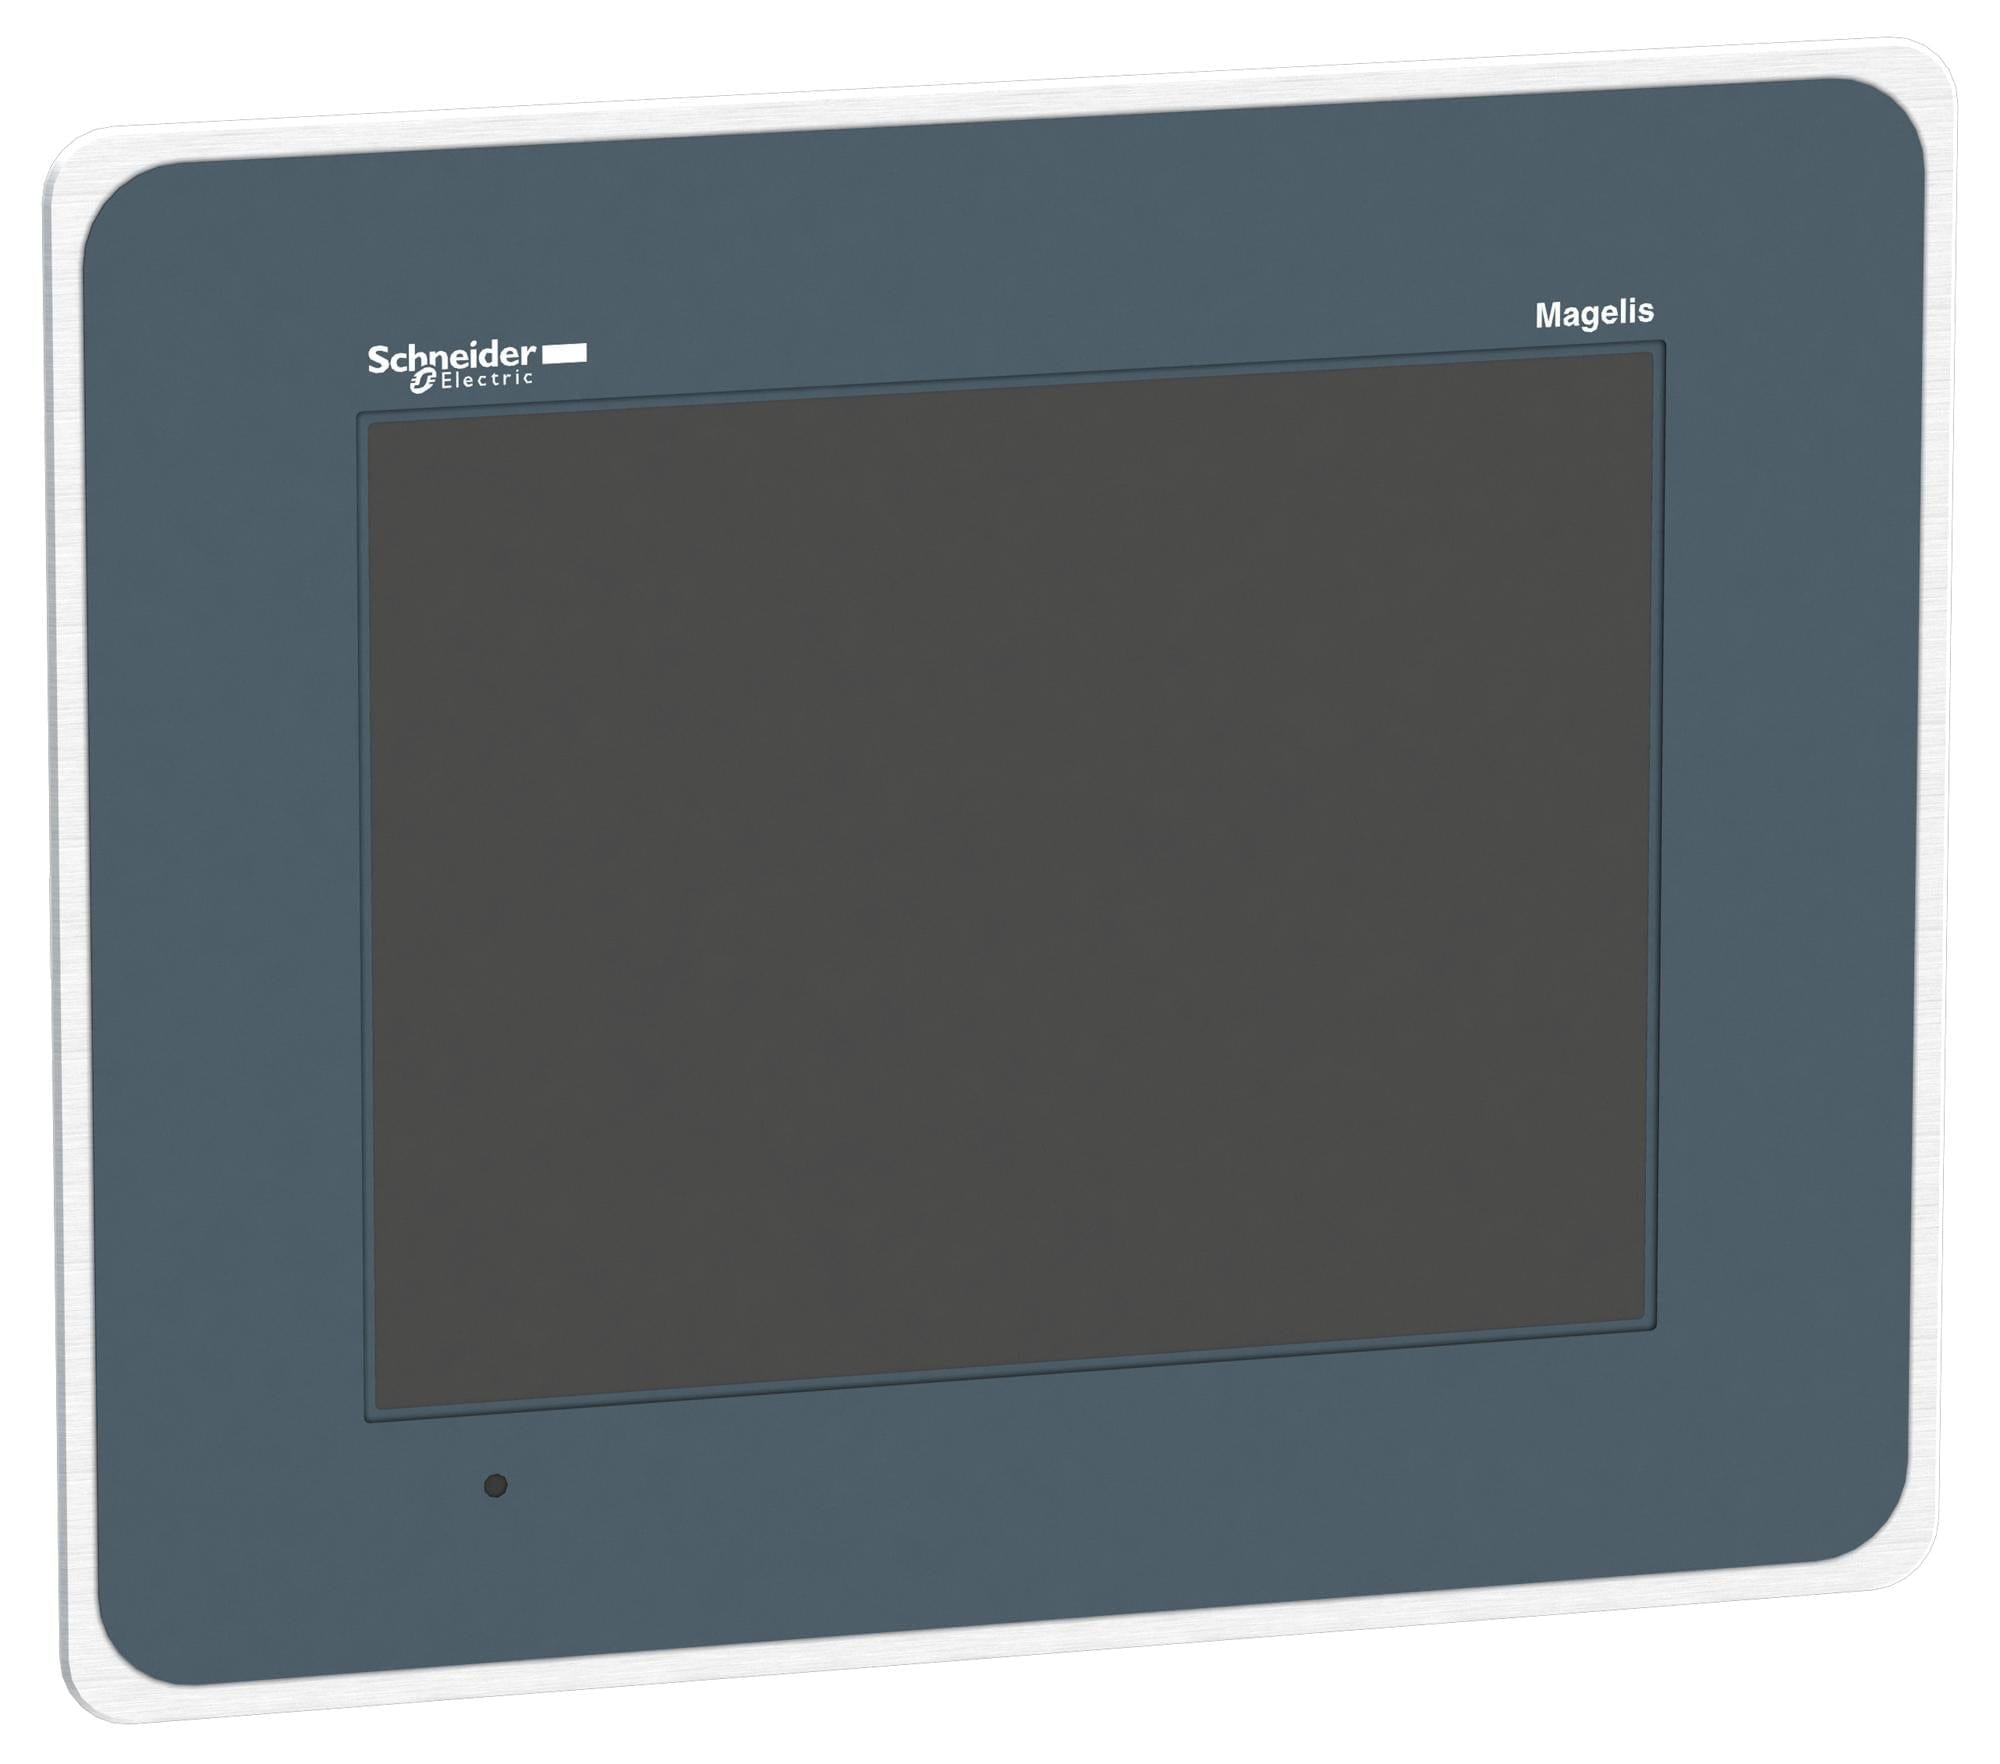 SCHNEIDER ELECTRIC Character HMIGTO5315 TOUCHSCREEN PANEL, 96MB, 10.4", 640X480 SCHNEIDER ELECTRIC 3109862 HMIGTO5315